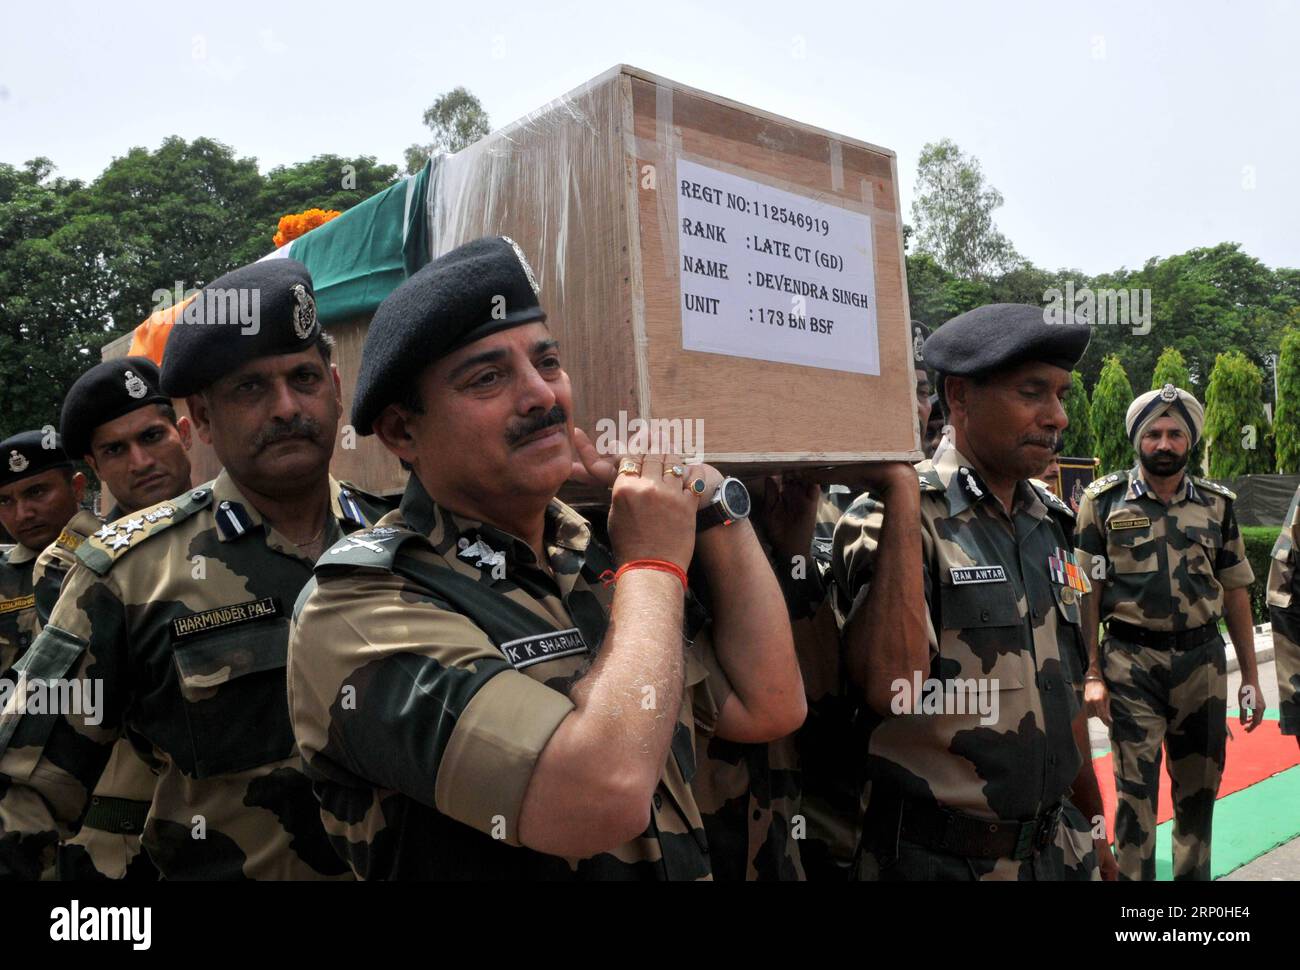 (180515) -- JAMMU, May 15, 2018 -- Border guards of India s Border Security Force (BSF) carry the coffin of their colleague during his wreath laying ceremony at their headquarter in Jammu, the winter capital of Indian-controlled Kashmir, May 15, 2018. An Indian border guard belonging to Border Security Force (BSF) was killed Tuesday during an exchange of fire with Pakistani troops on International Border (IB) in Kashmir, officials said. (dtf) KASHMIR-INDIA-BORDER GUARD-WREATH LAYING CEREMONY ZhangxNaijie PUBLICATIONxNOTxINxCHN Stock Photo